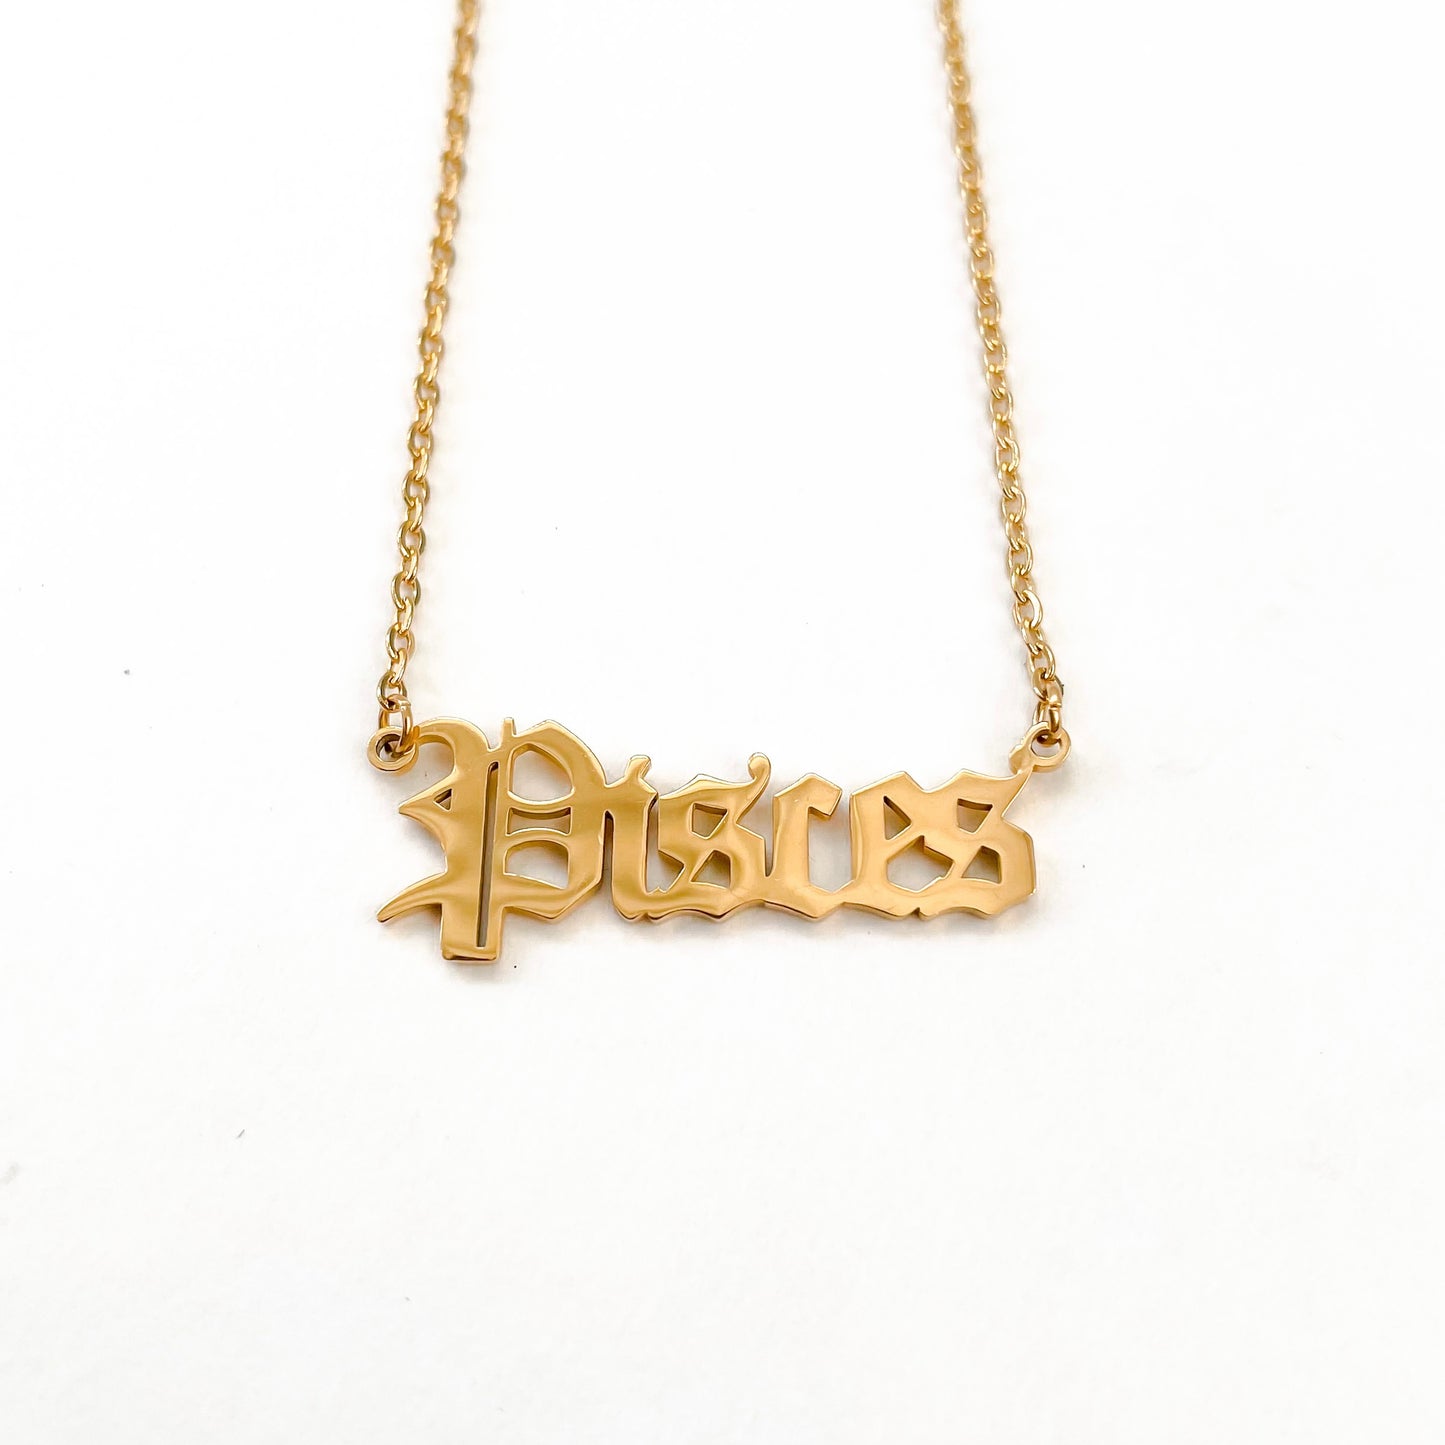 Pisces Necklace in Gold